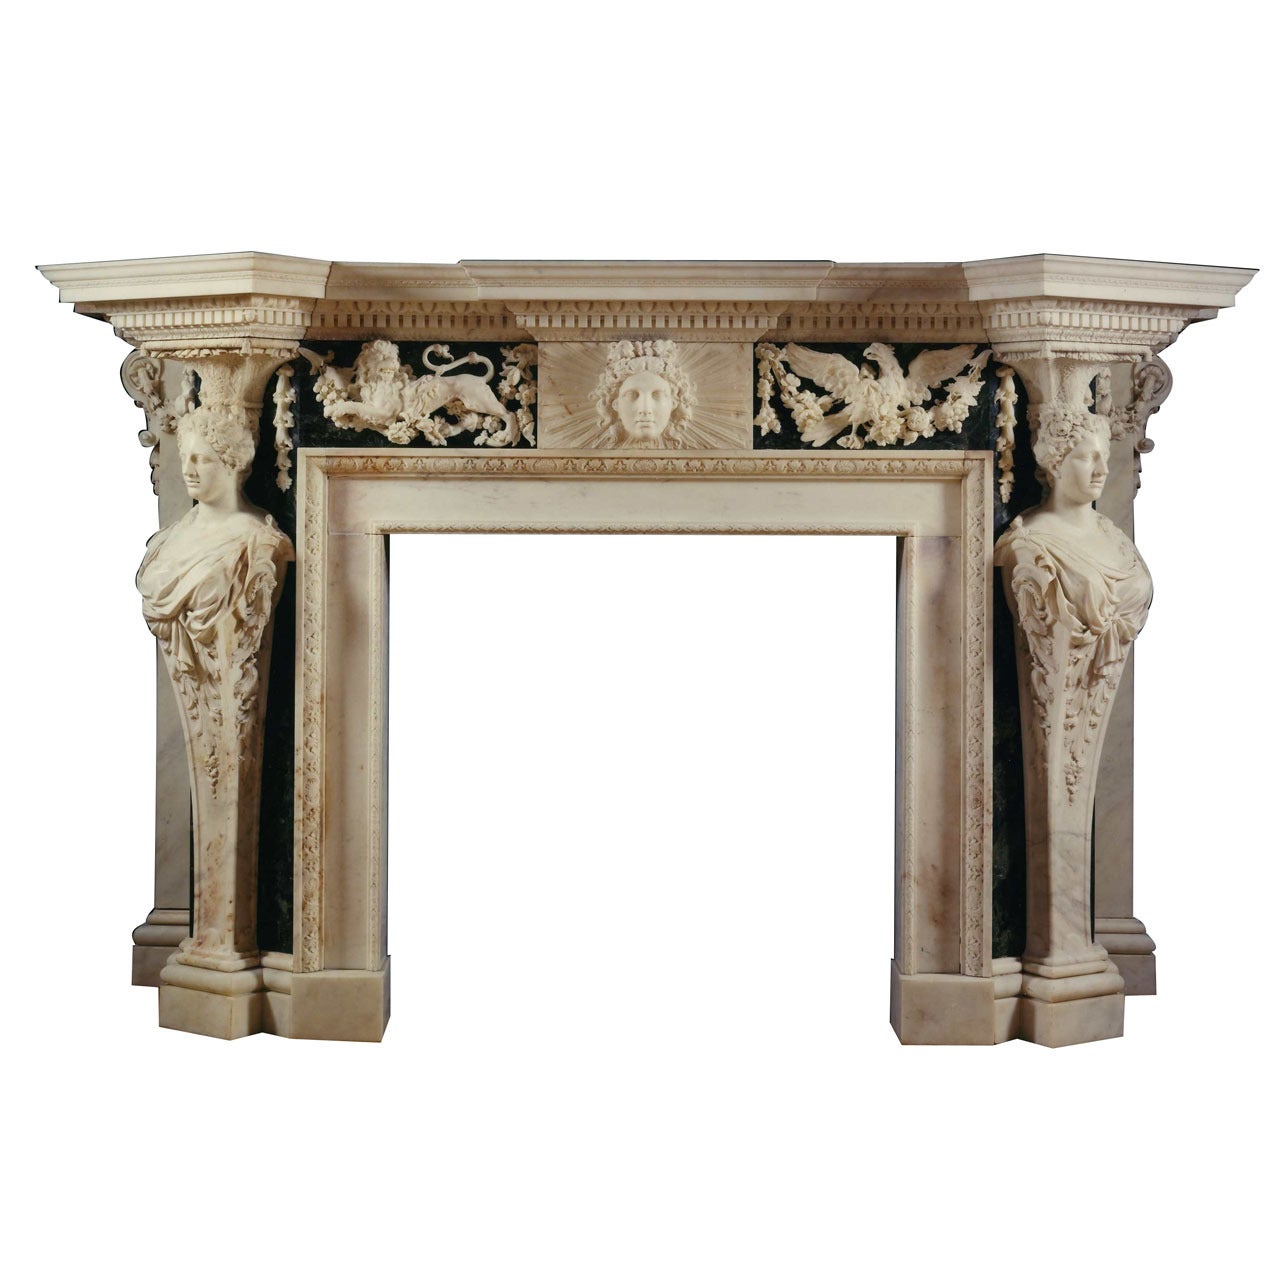 A Pair Of Marble Chimneypieces Possibly Designed By William Kent For Sale